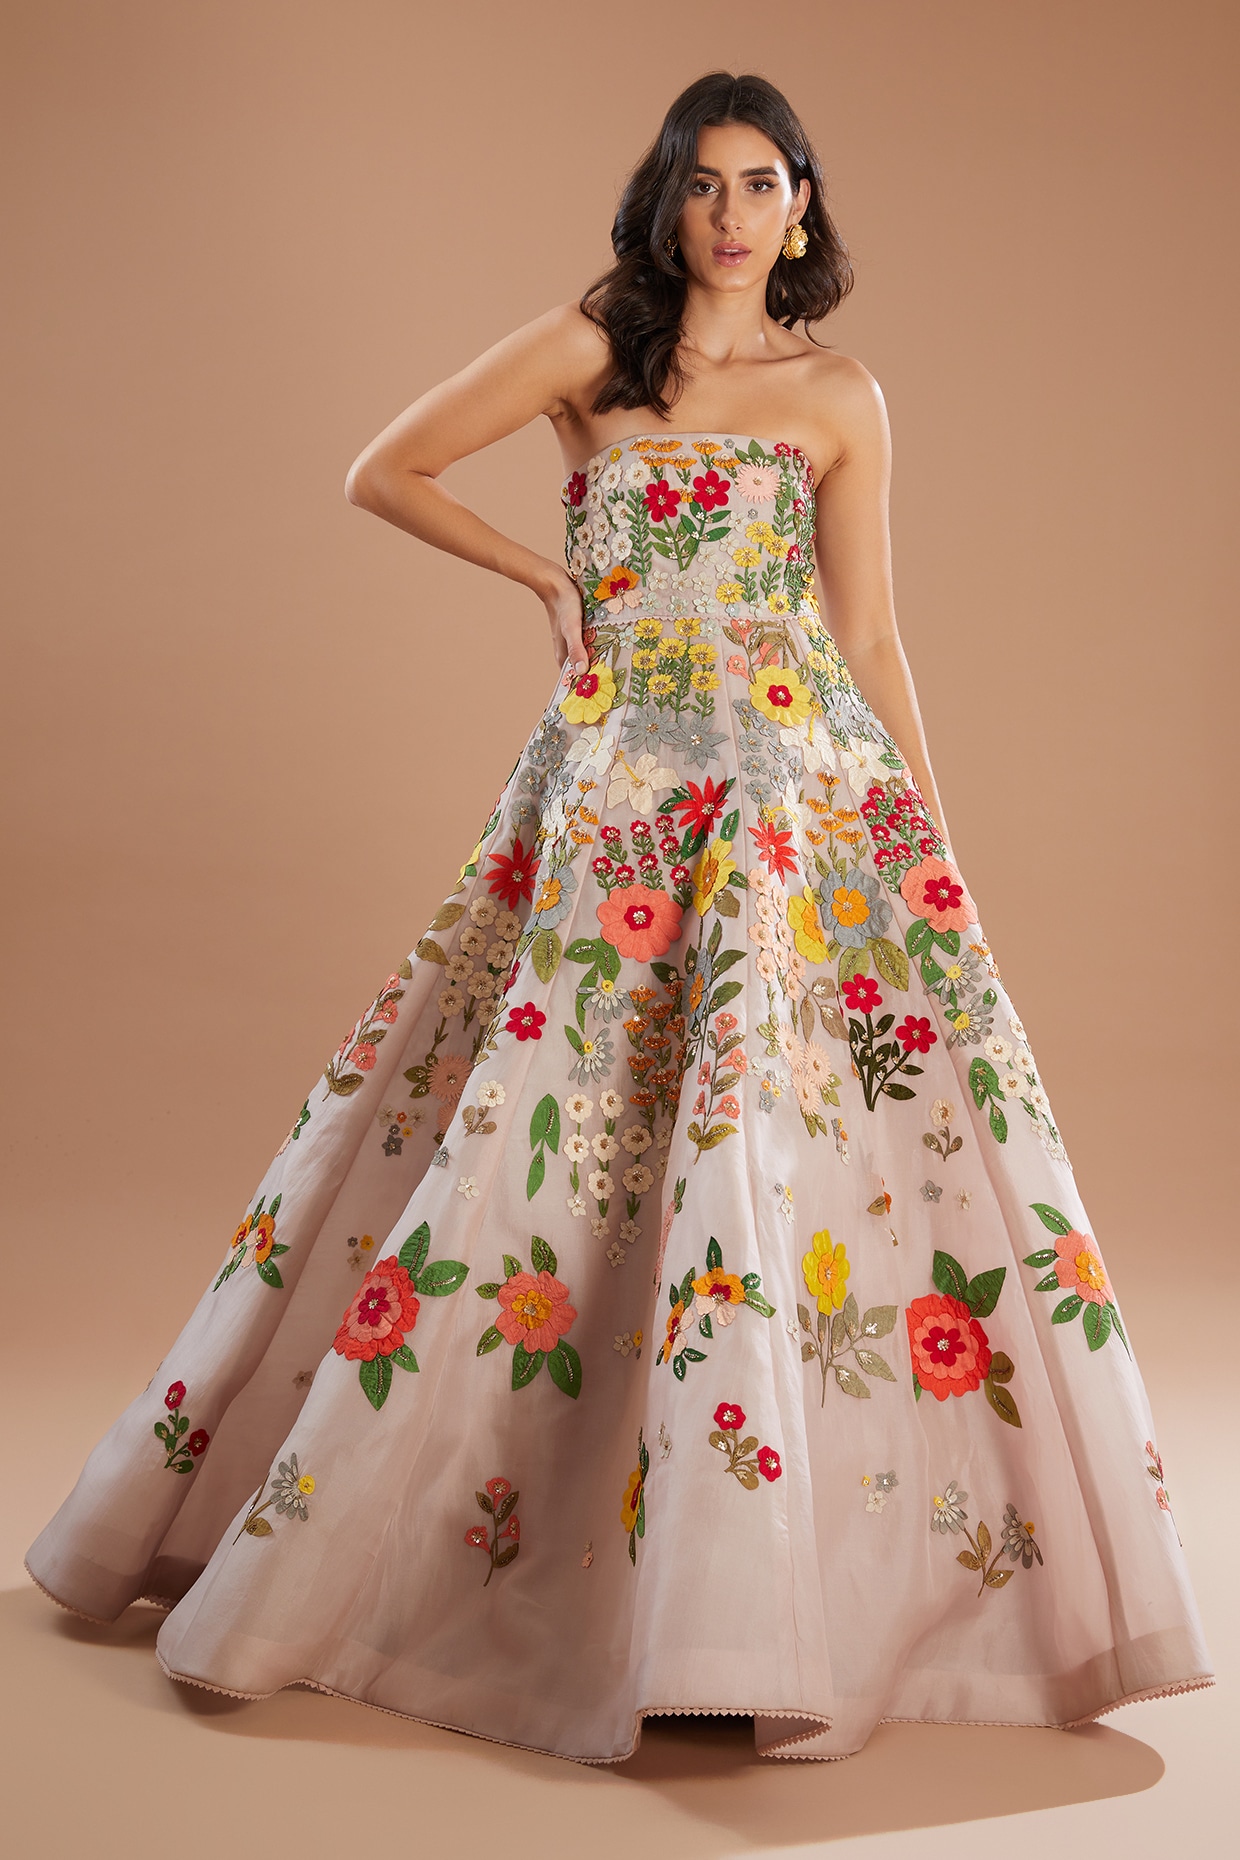 Buy Latest Indian Wedding Gown Online In India | SALE | Me99